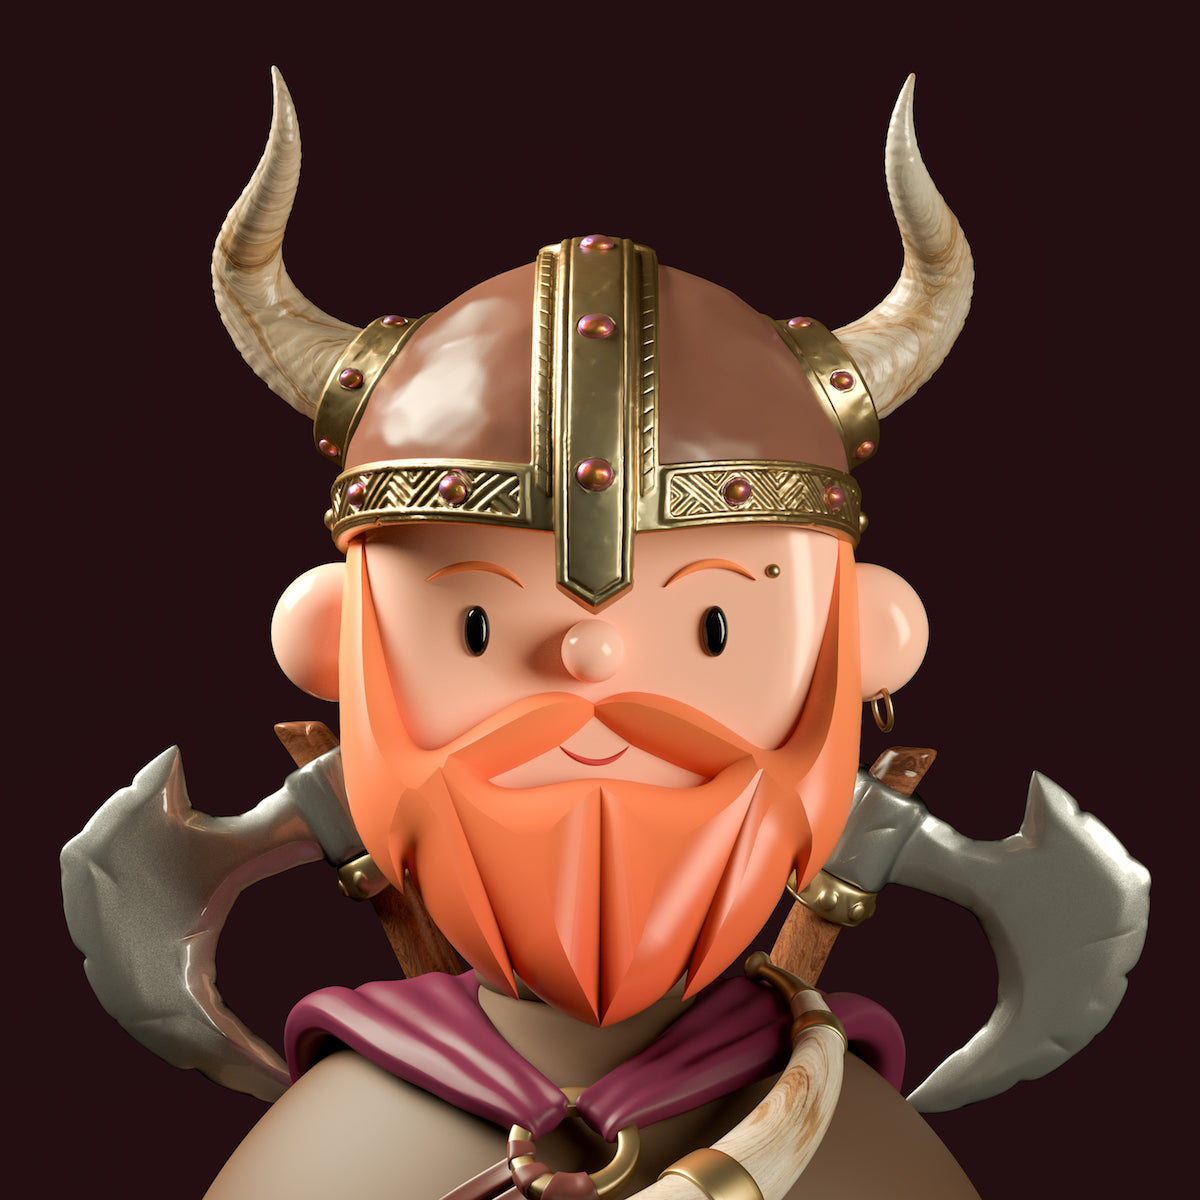 Viking Toy Face by Amrit Pal Singh